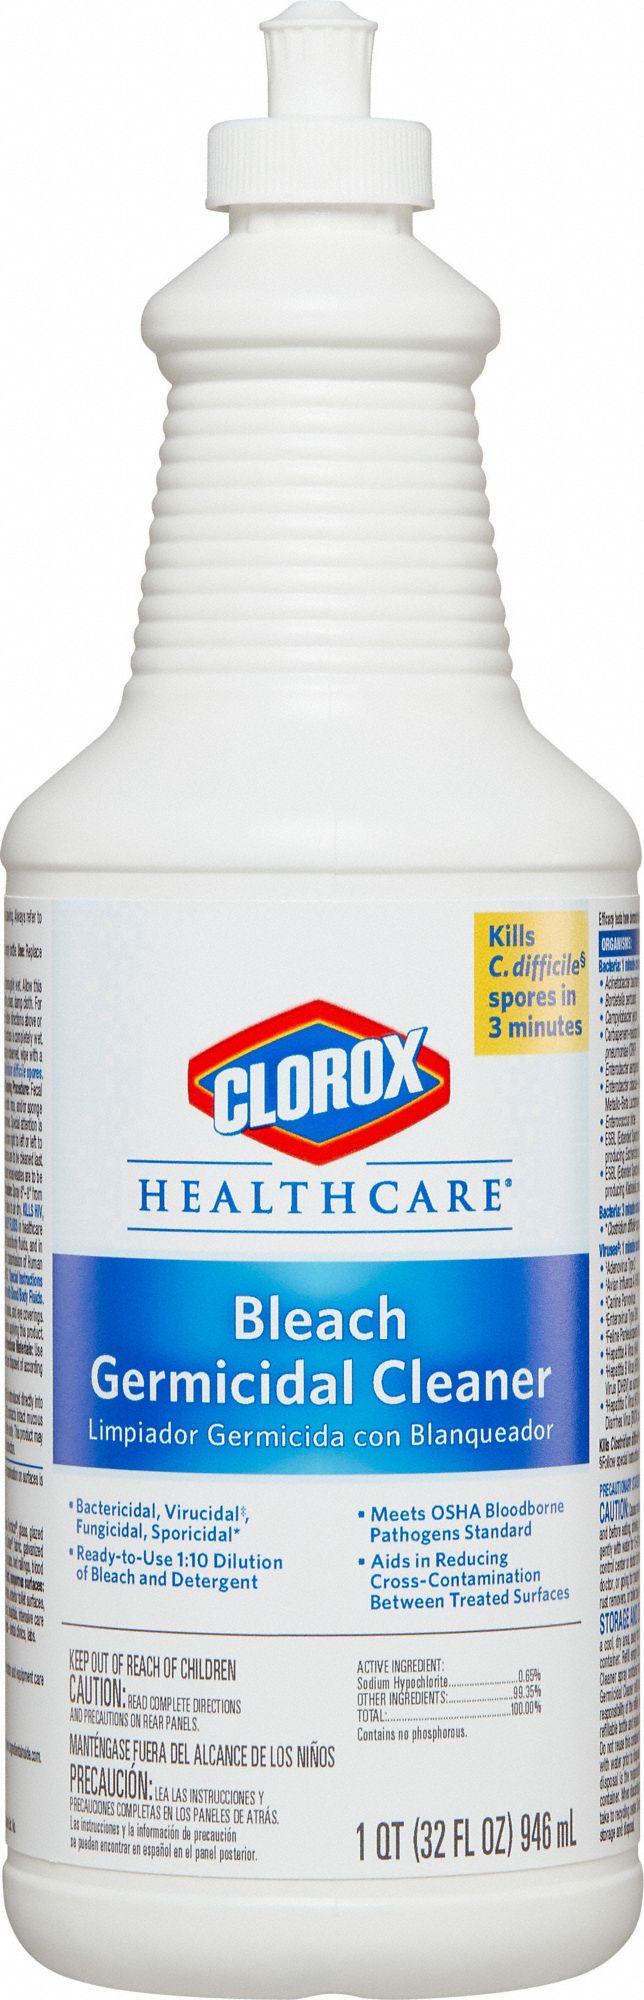 Bleach Germicidal Cleaner: Bottle, 32 oz Container Size, Ready to Use, 6 PK